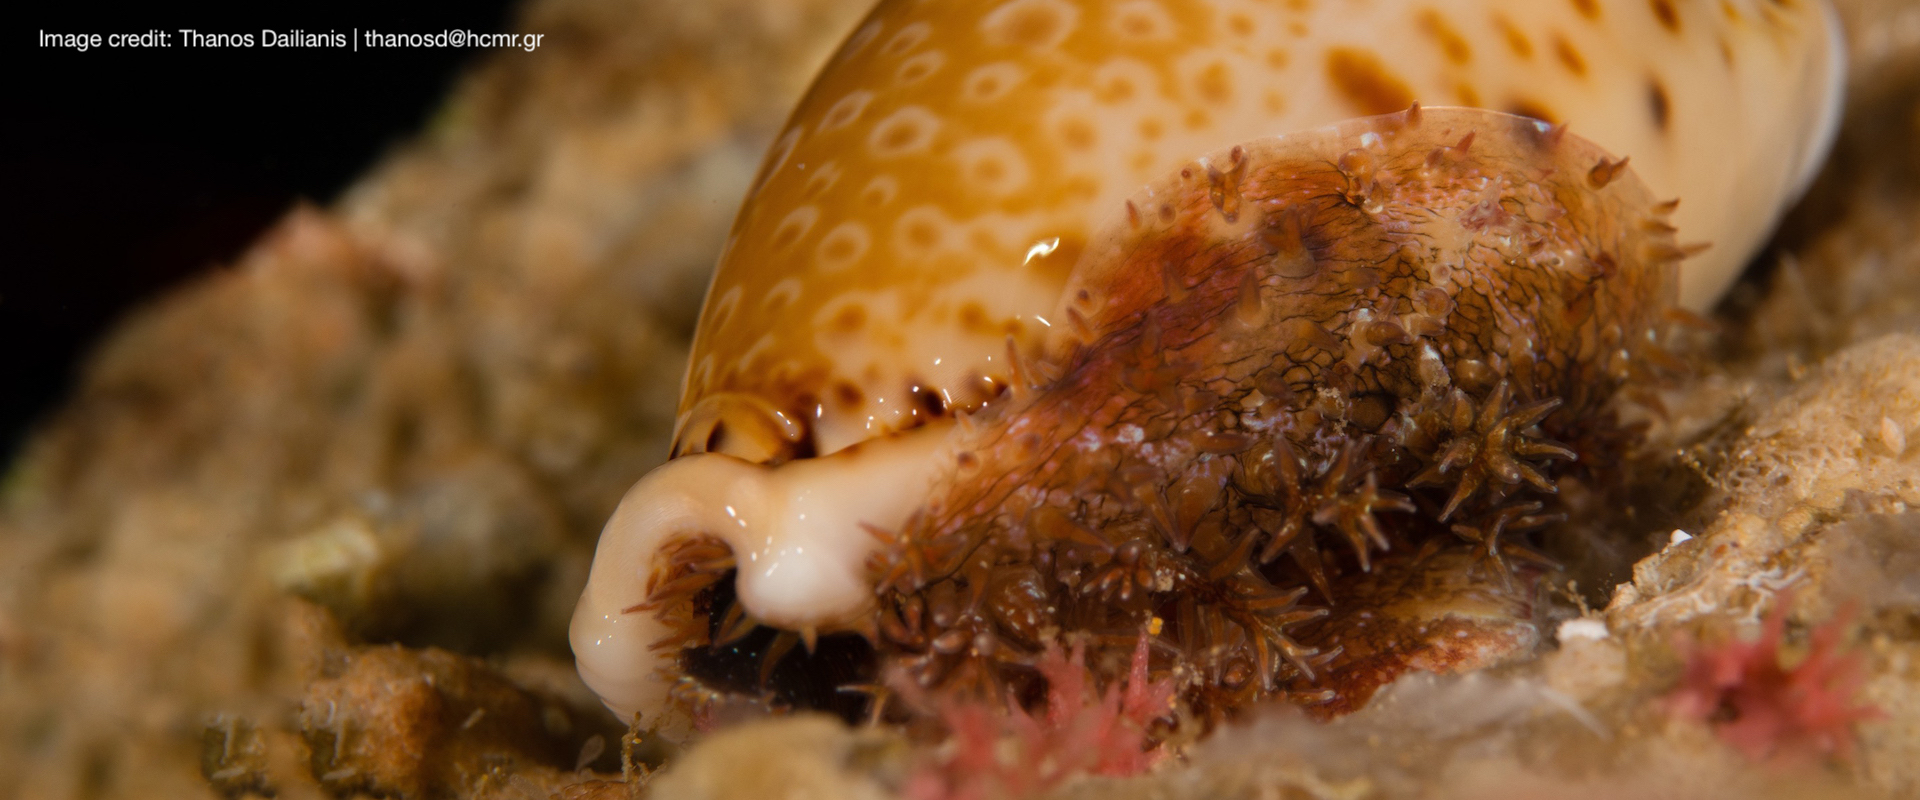 EFFECTS OF CLIMATE CHANGE AND OCEAN ACIDIFICATION ON MARINE GASTROPODS